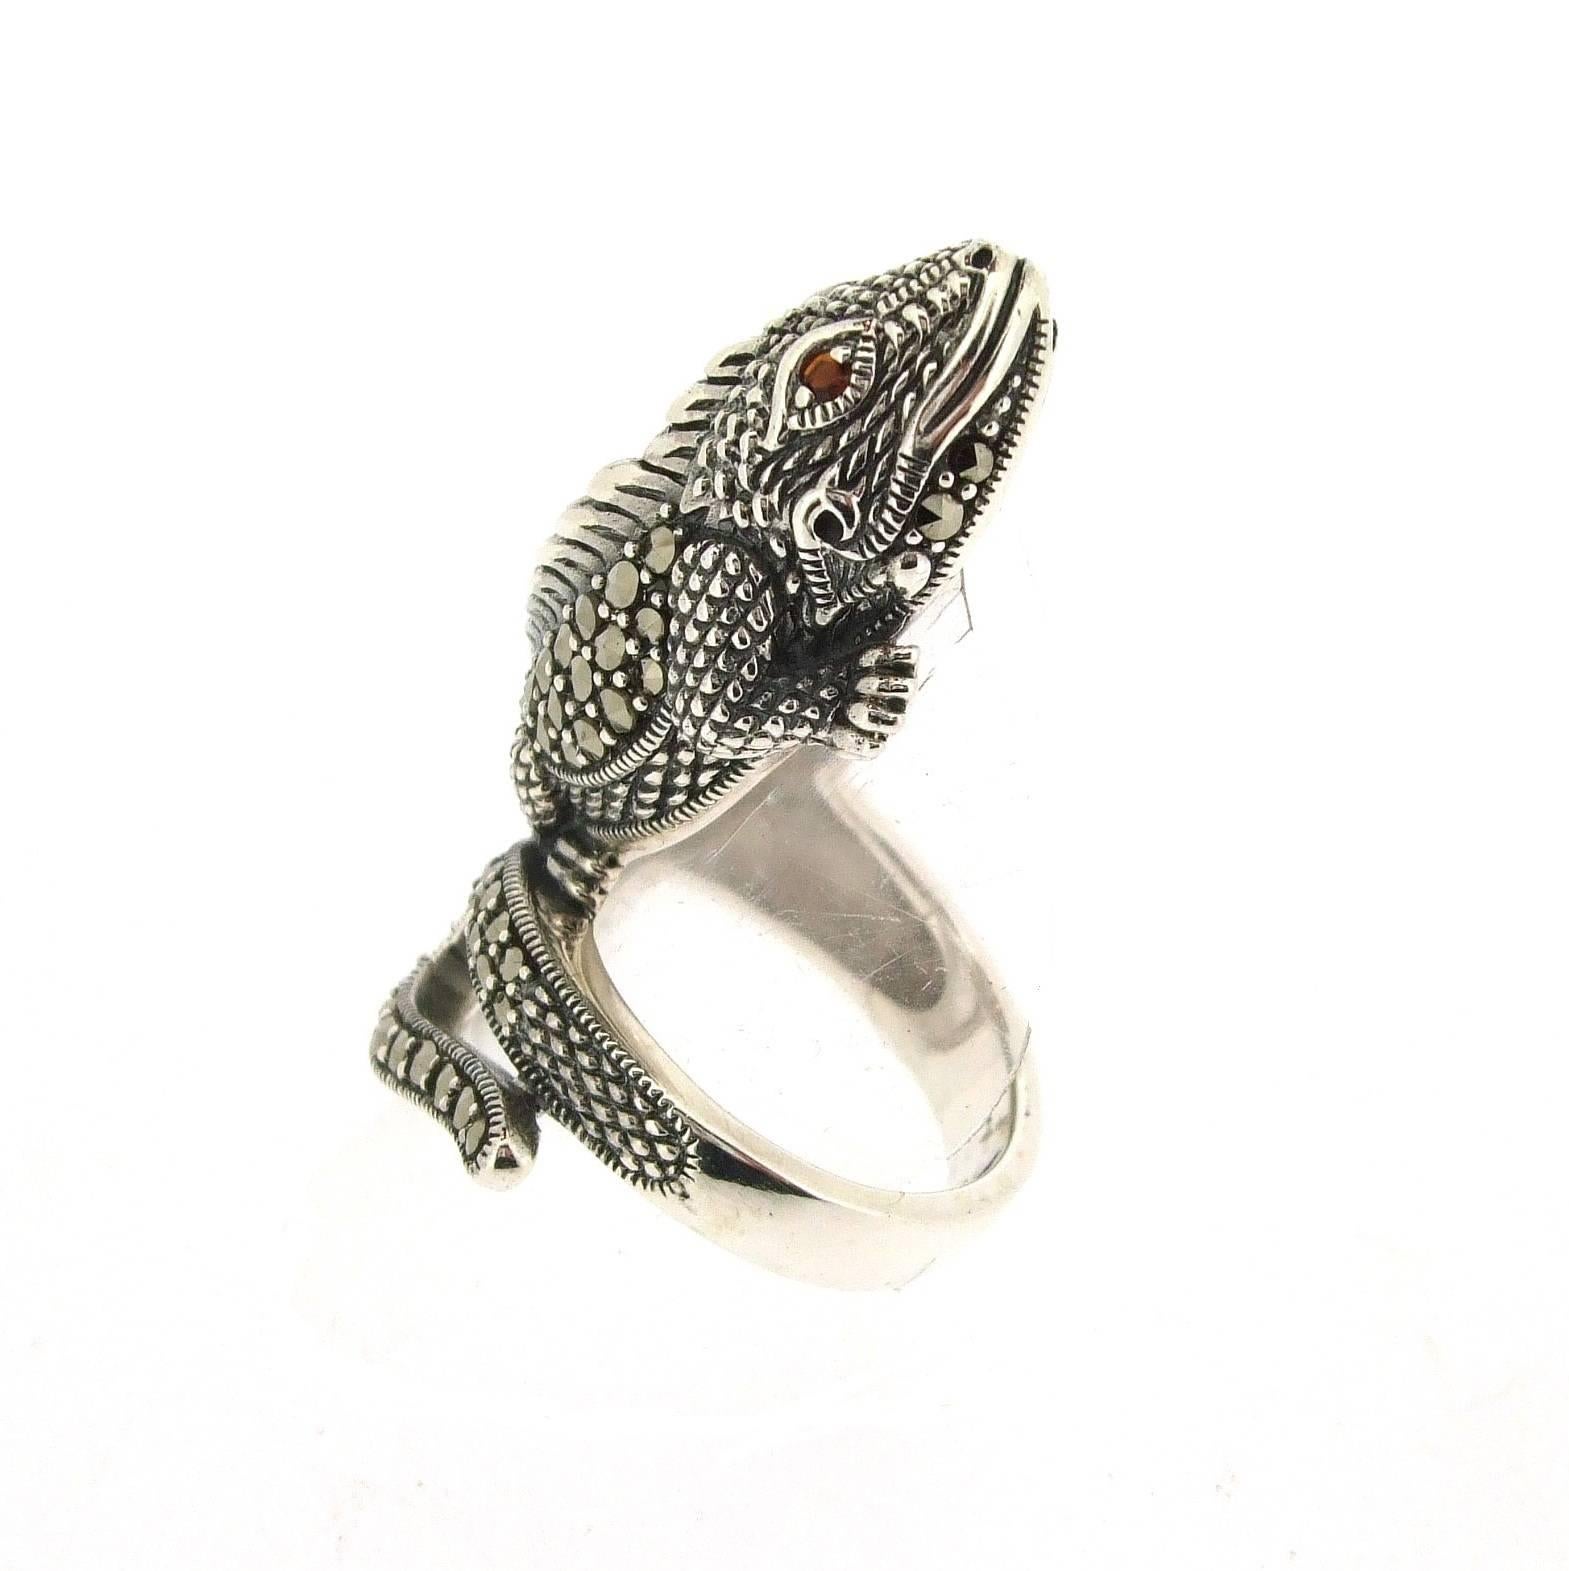 A new sterling silver ring of an Iguana/ Lizard set with sparling marcasite stones on his back and tail with garnet eyes. Silver hallmarked 925. 

